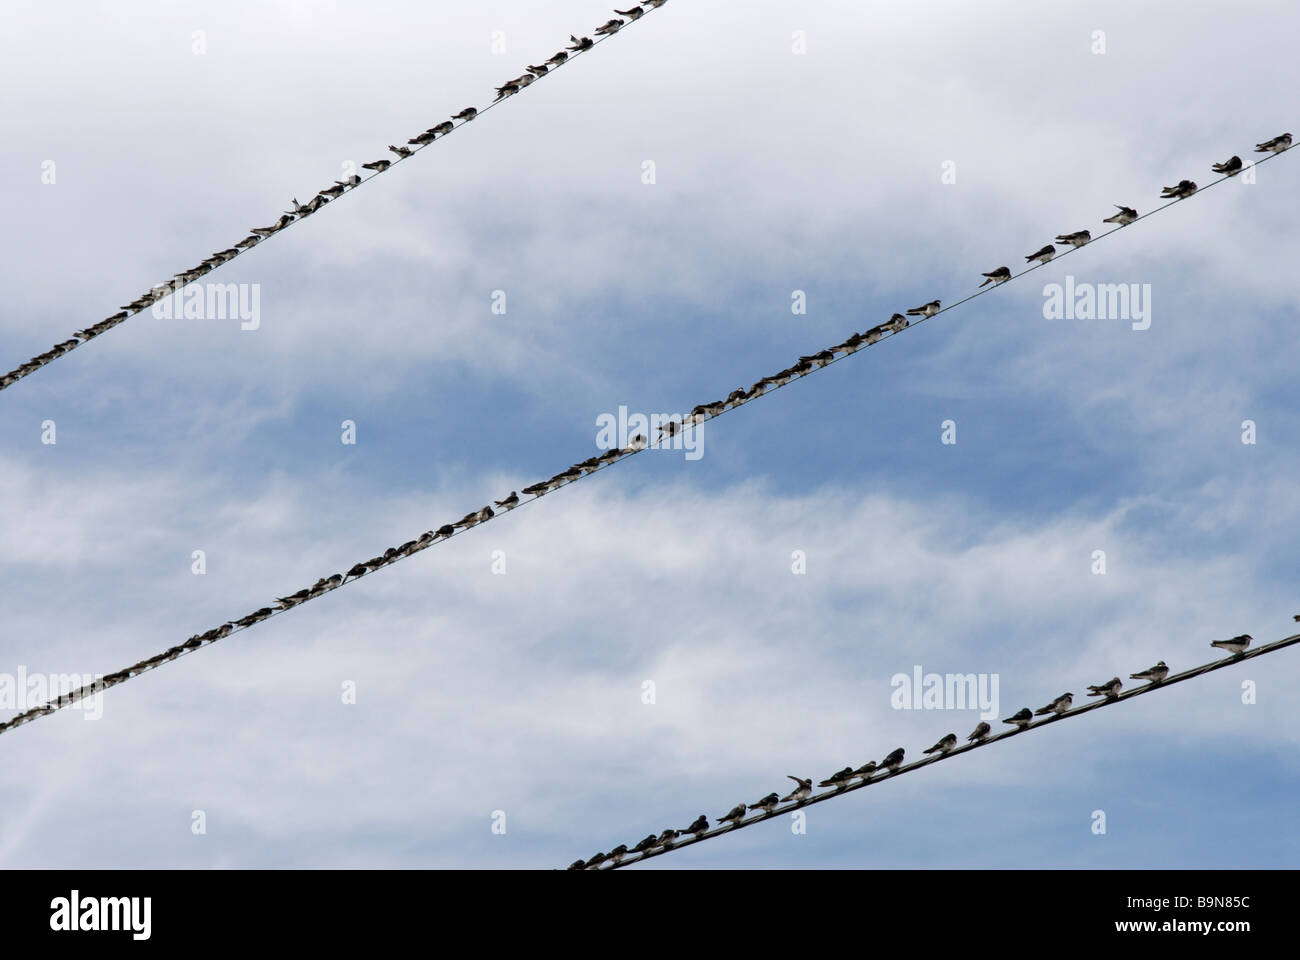 Tree swallows, Tachycineta bicolor, congregating on wires during autumn migration, Cape May, New Jersey. Stock Photo